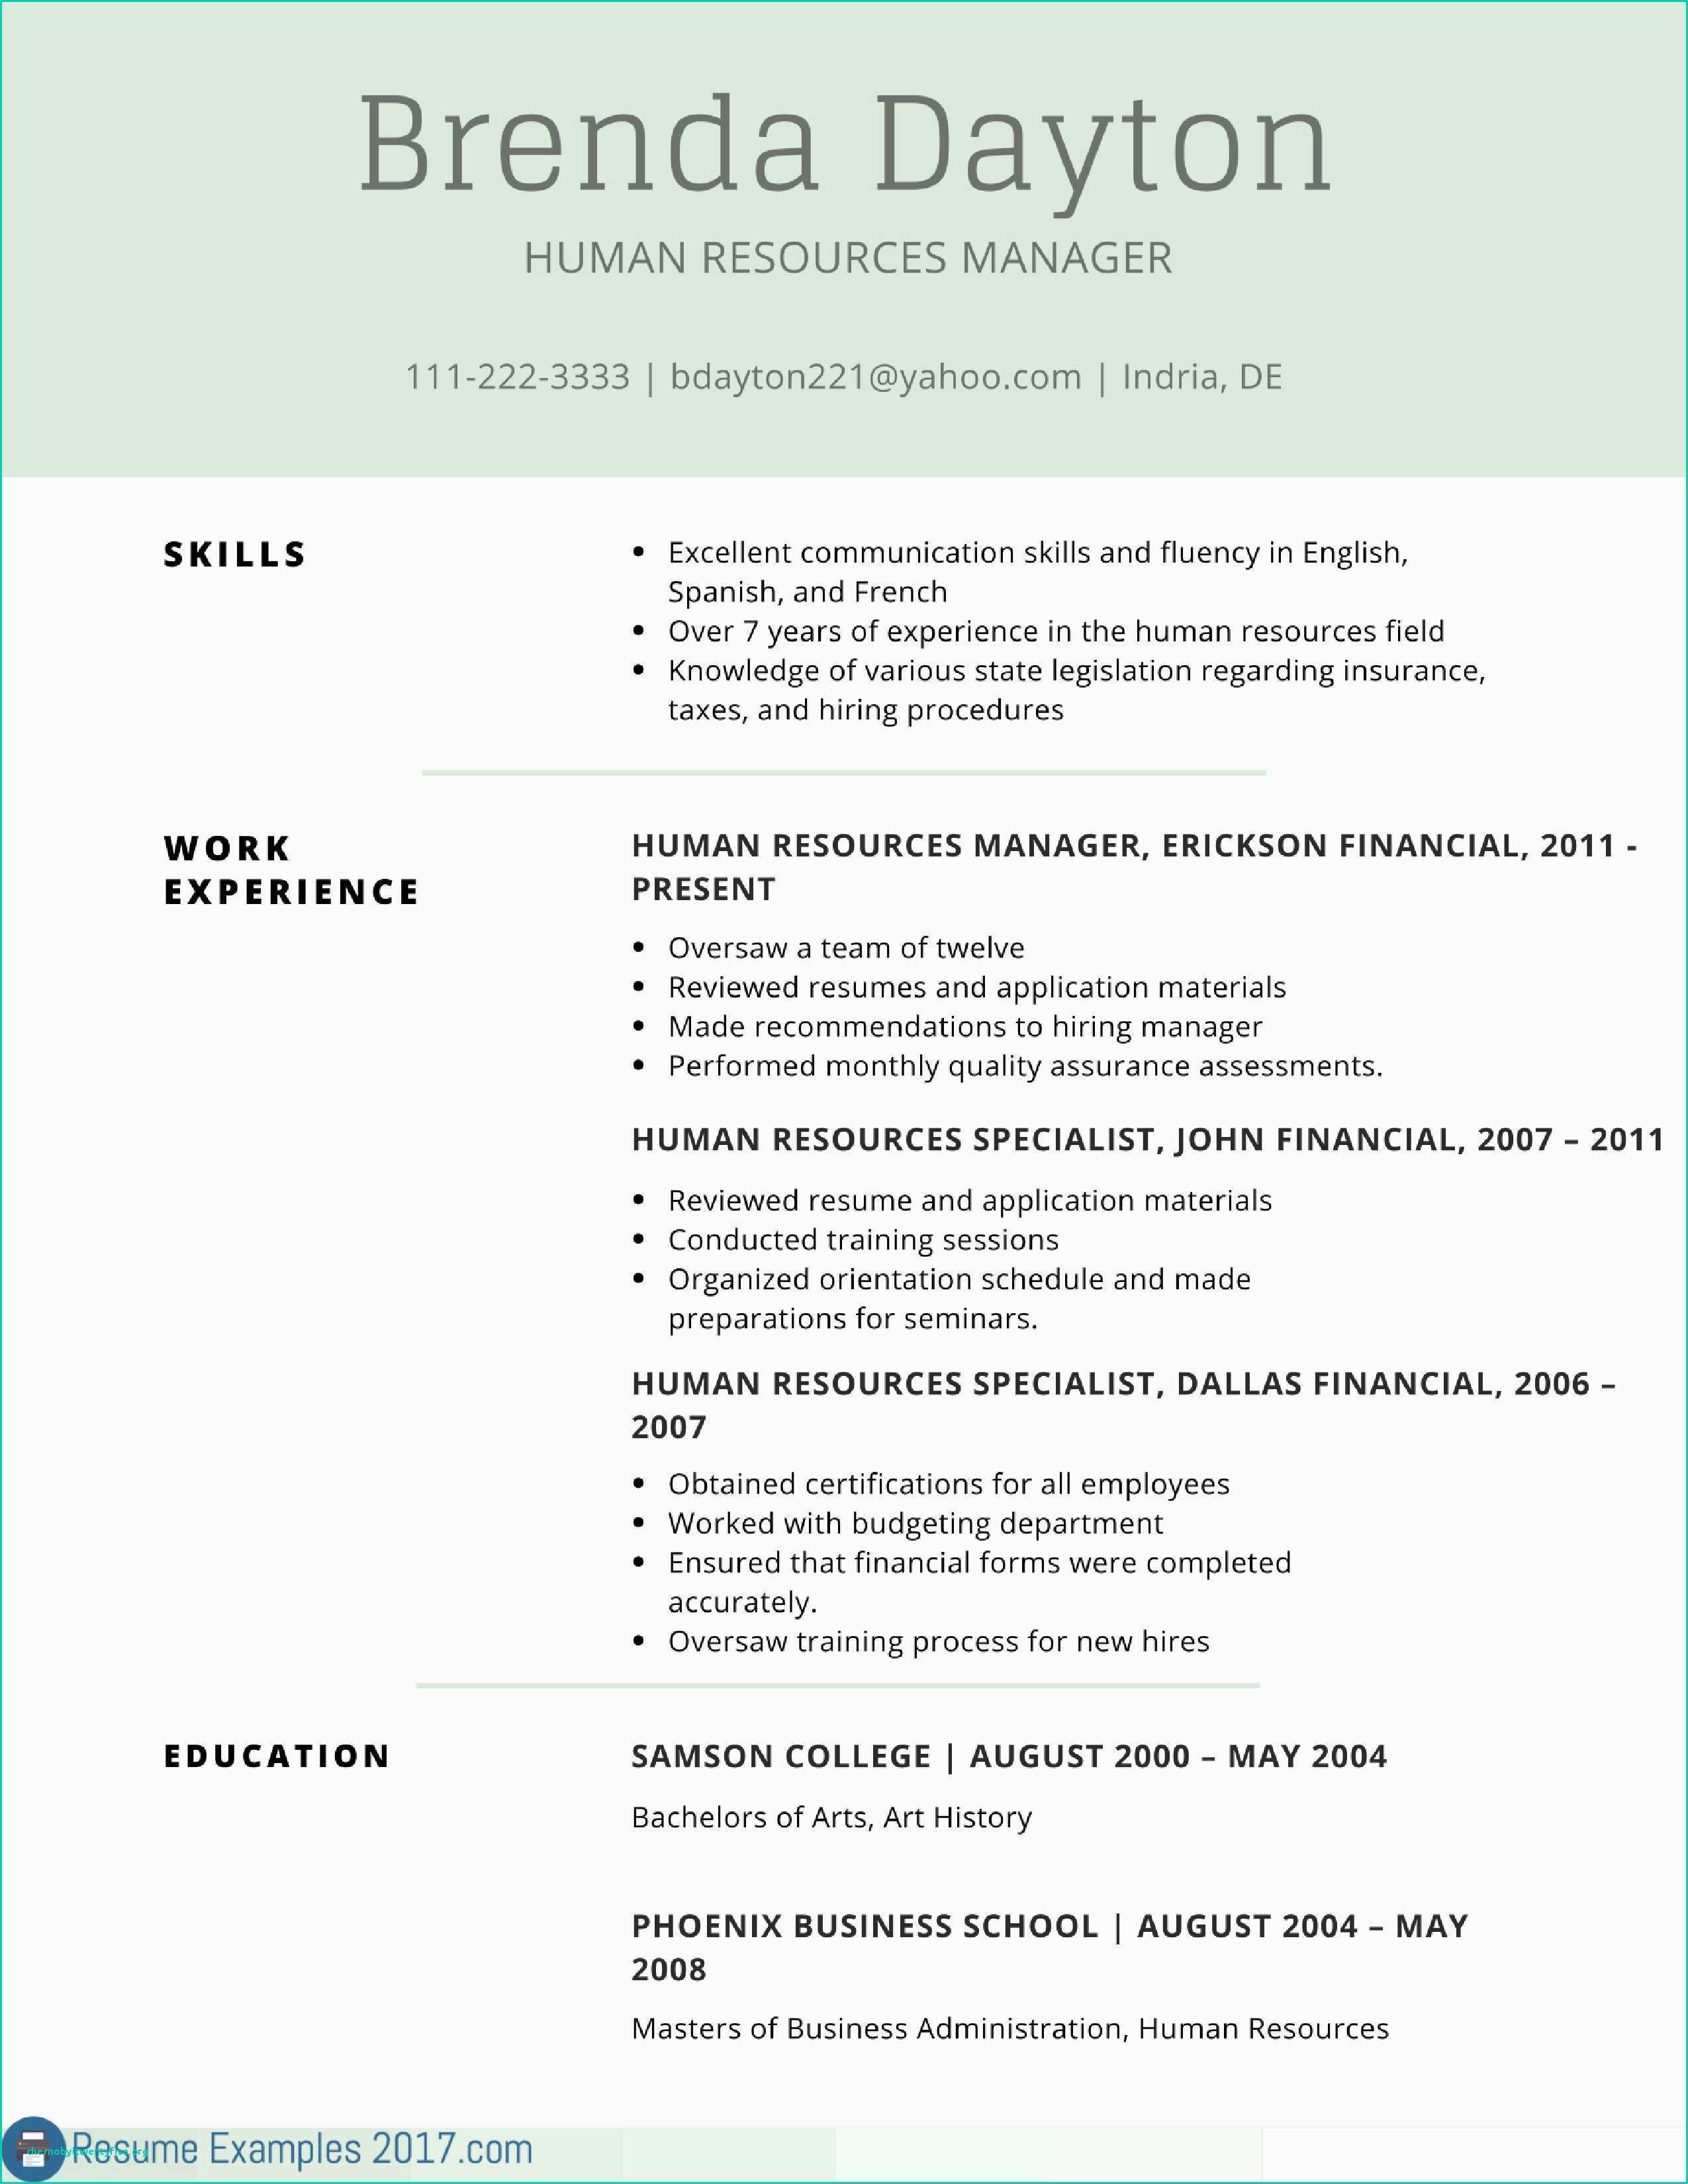 Resume Formats Professional Resume Formats Fresh Fresh - Examples Of Good Resumes , HD Wallpaper & Backgrounds